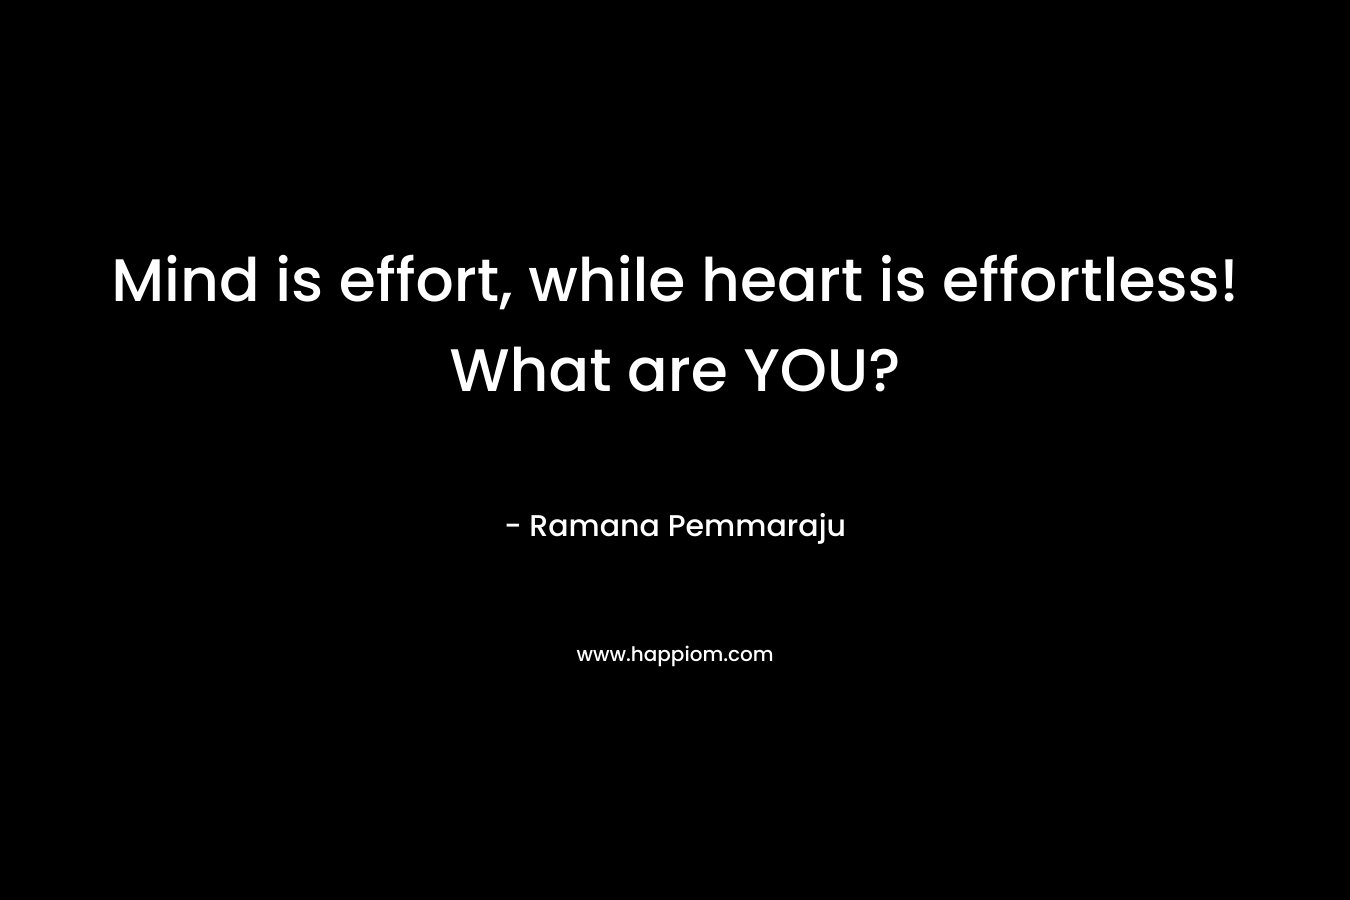 Mind is effort, while heart is effortless! What are YOU?